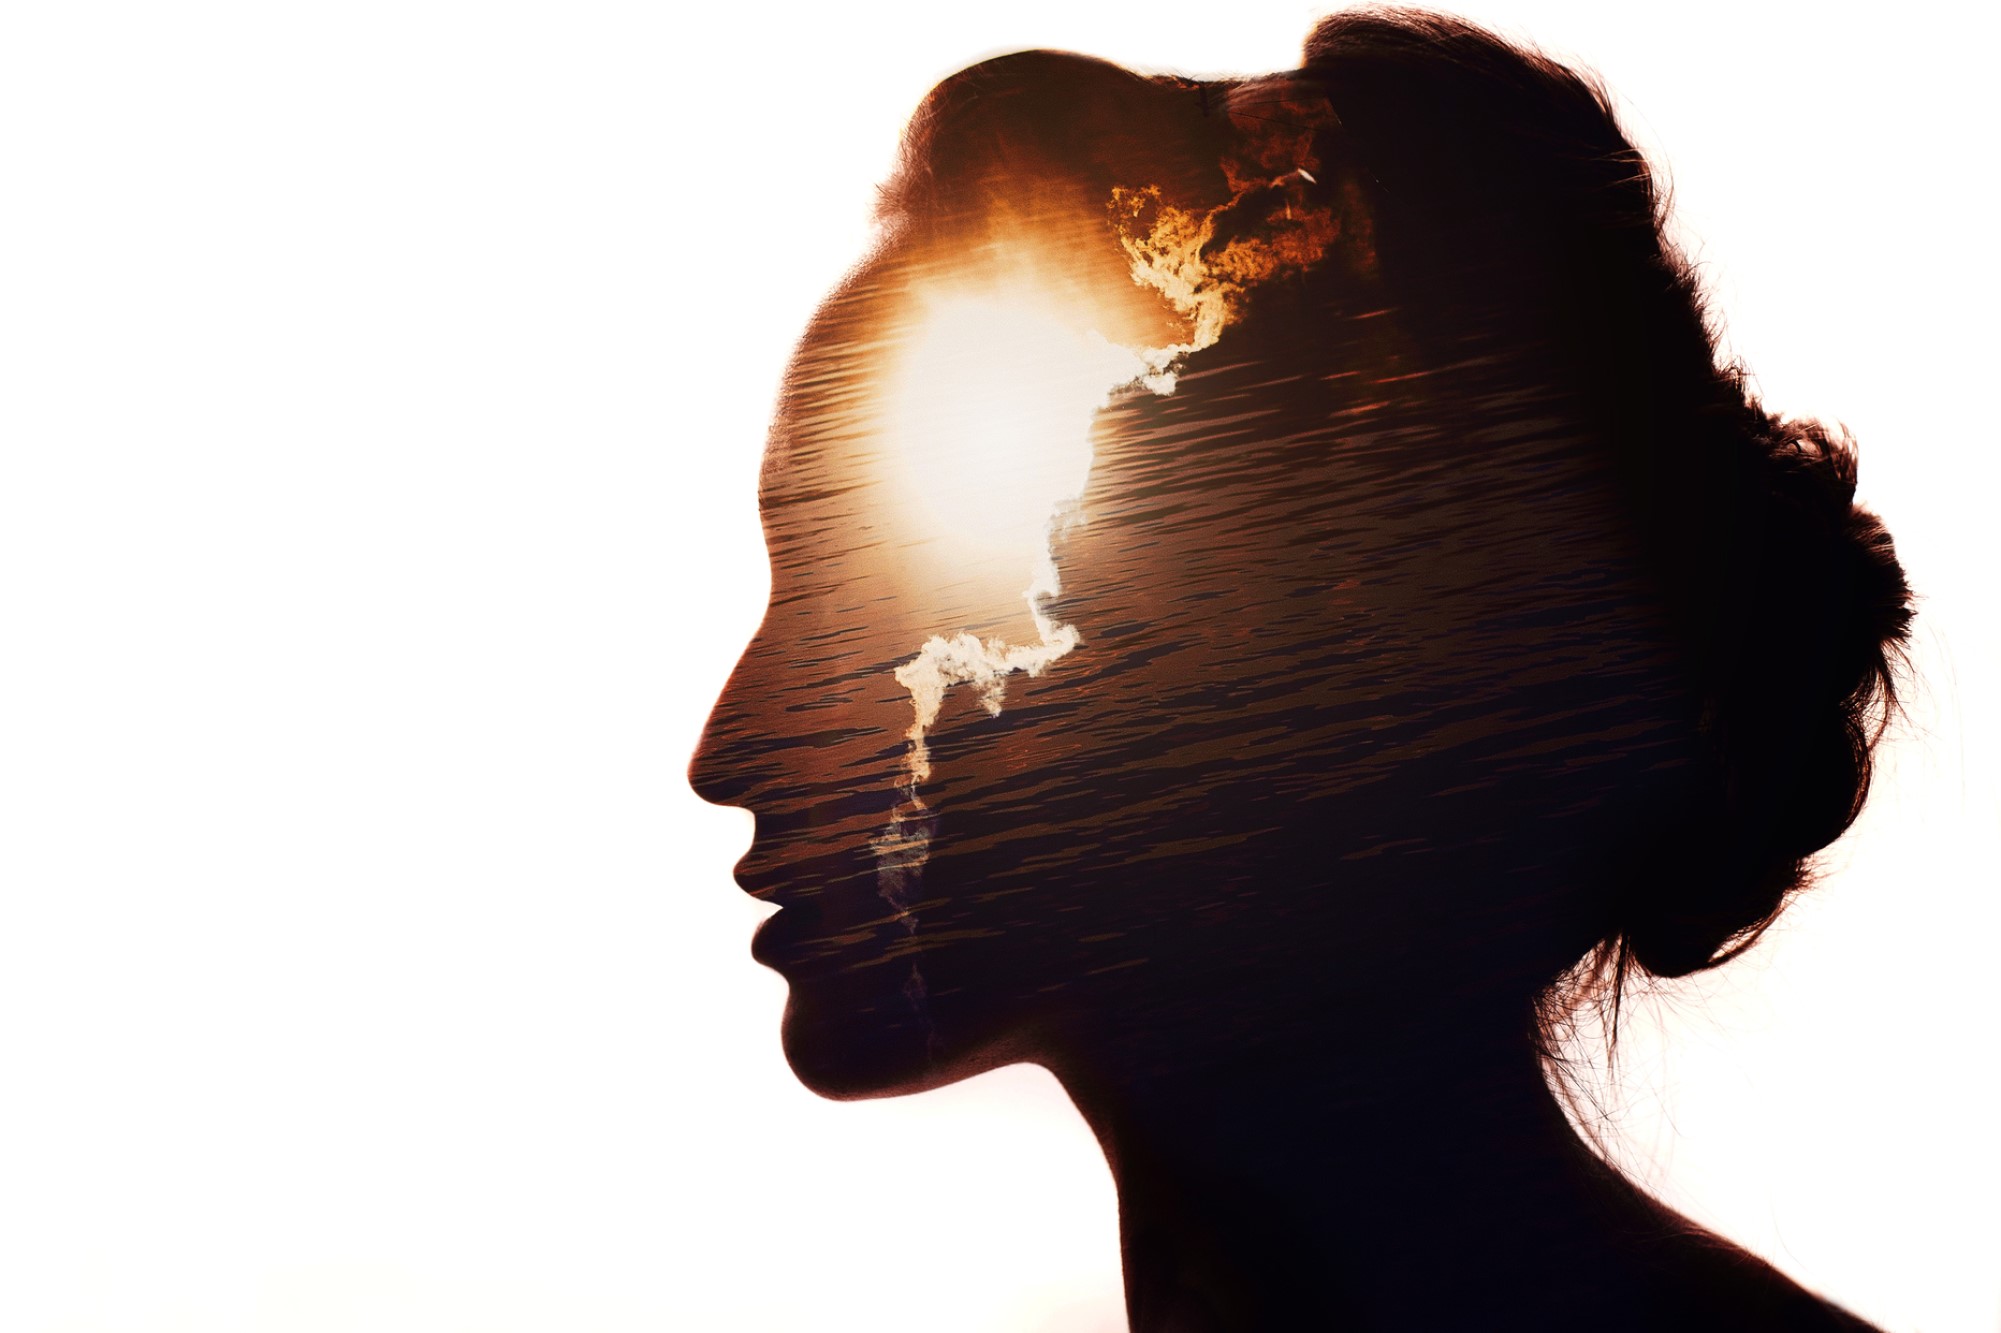 image of woman's profile in silhouette with sun behind clouds superimposed on her mind